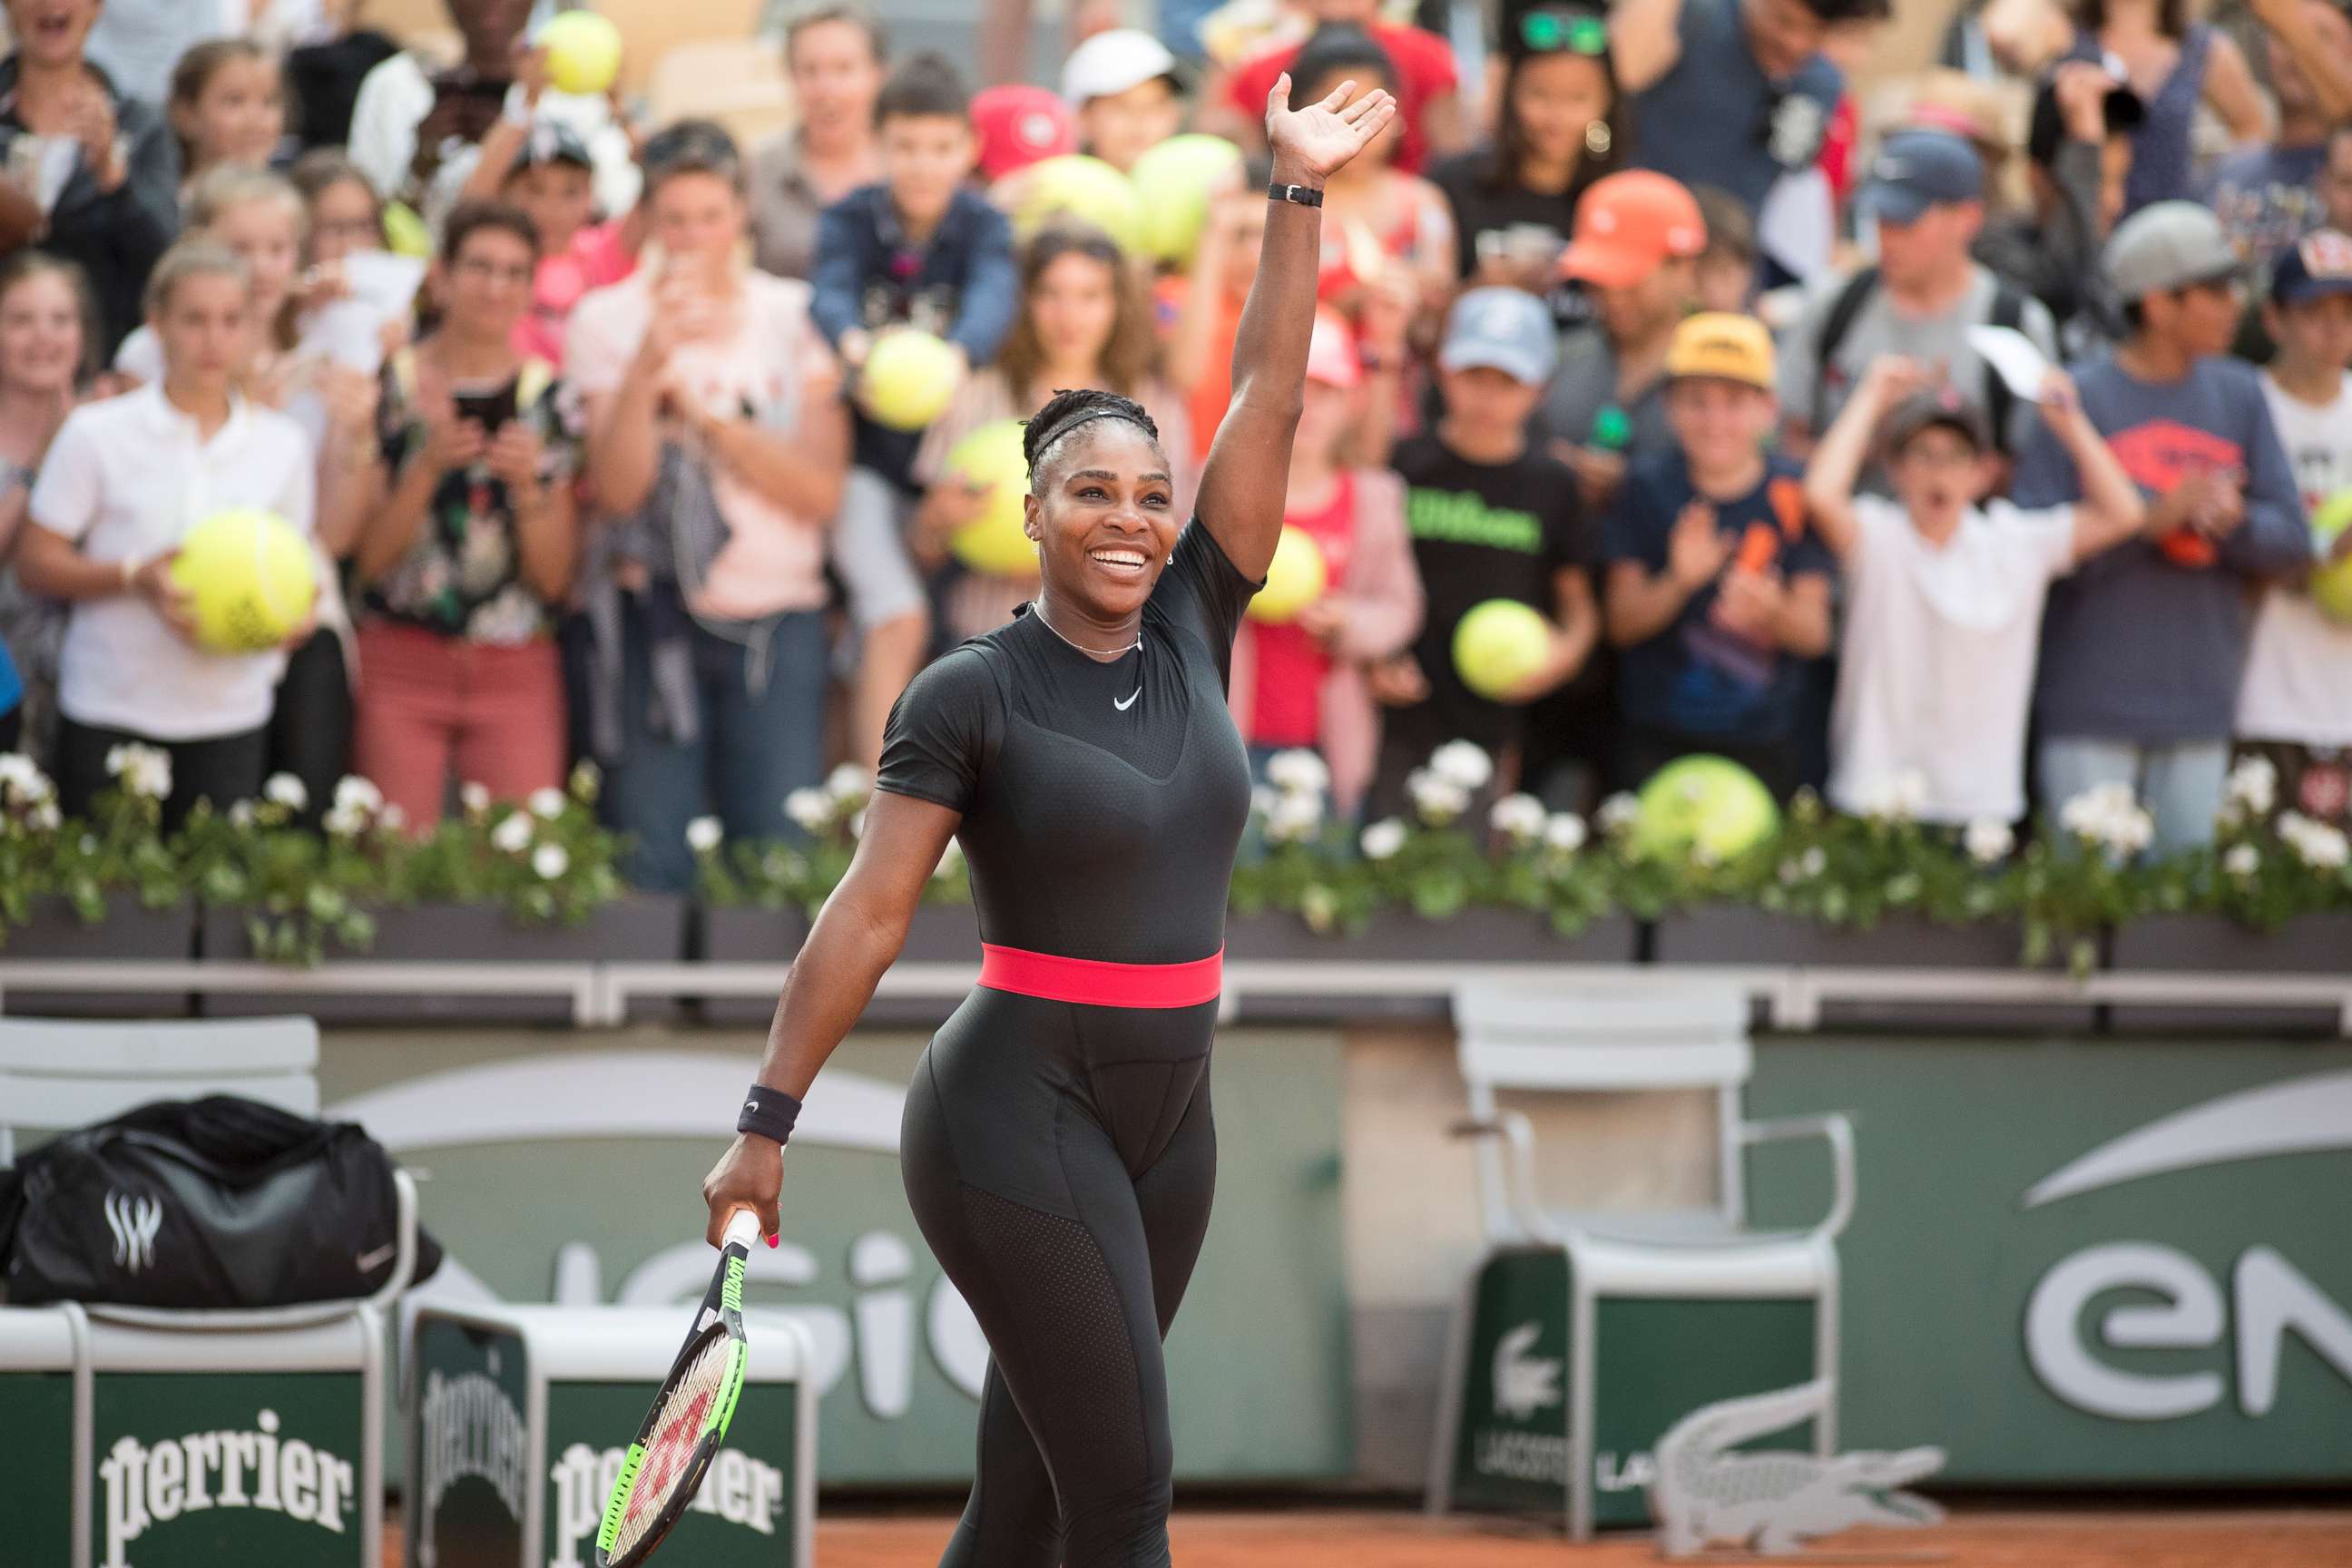 PHOTO: Serena Williams of the U.S. celebrates her win against Julia Goerges of Germany on Court Suzanne Lenglen in the Women's Singles Competition at the 2018 French Open Tennis Tournament at Roland Garros, June 2nd 2018, in Paris.